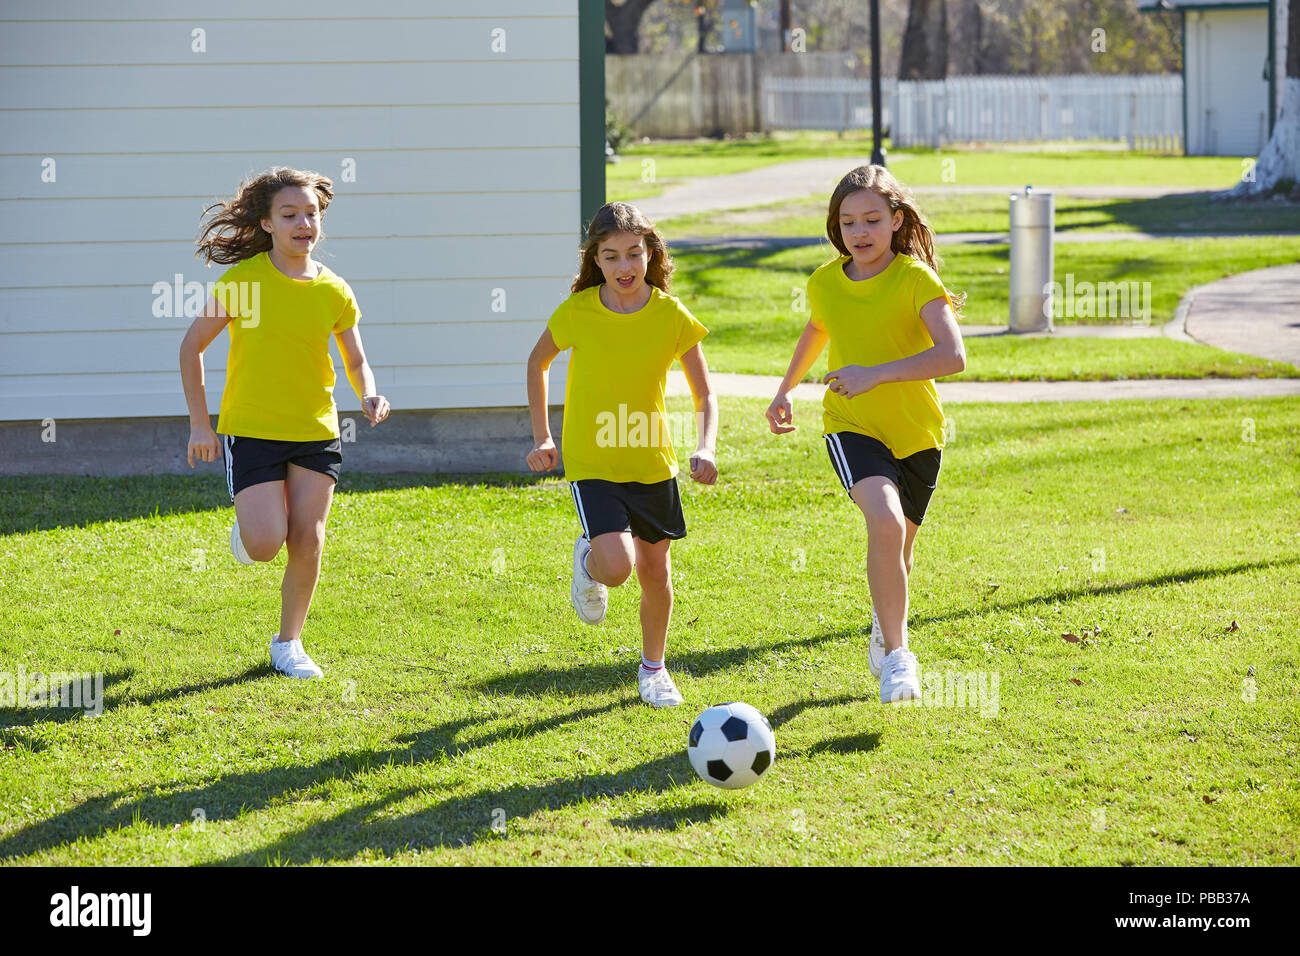 Friend girls teens playing football soccer in a park turf grass Stock Photo